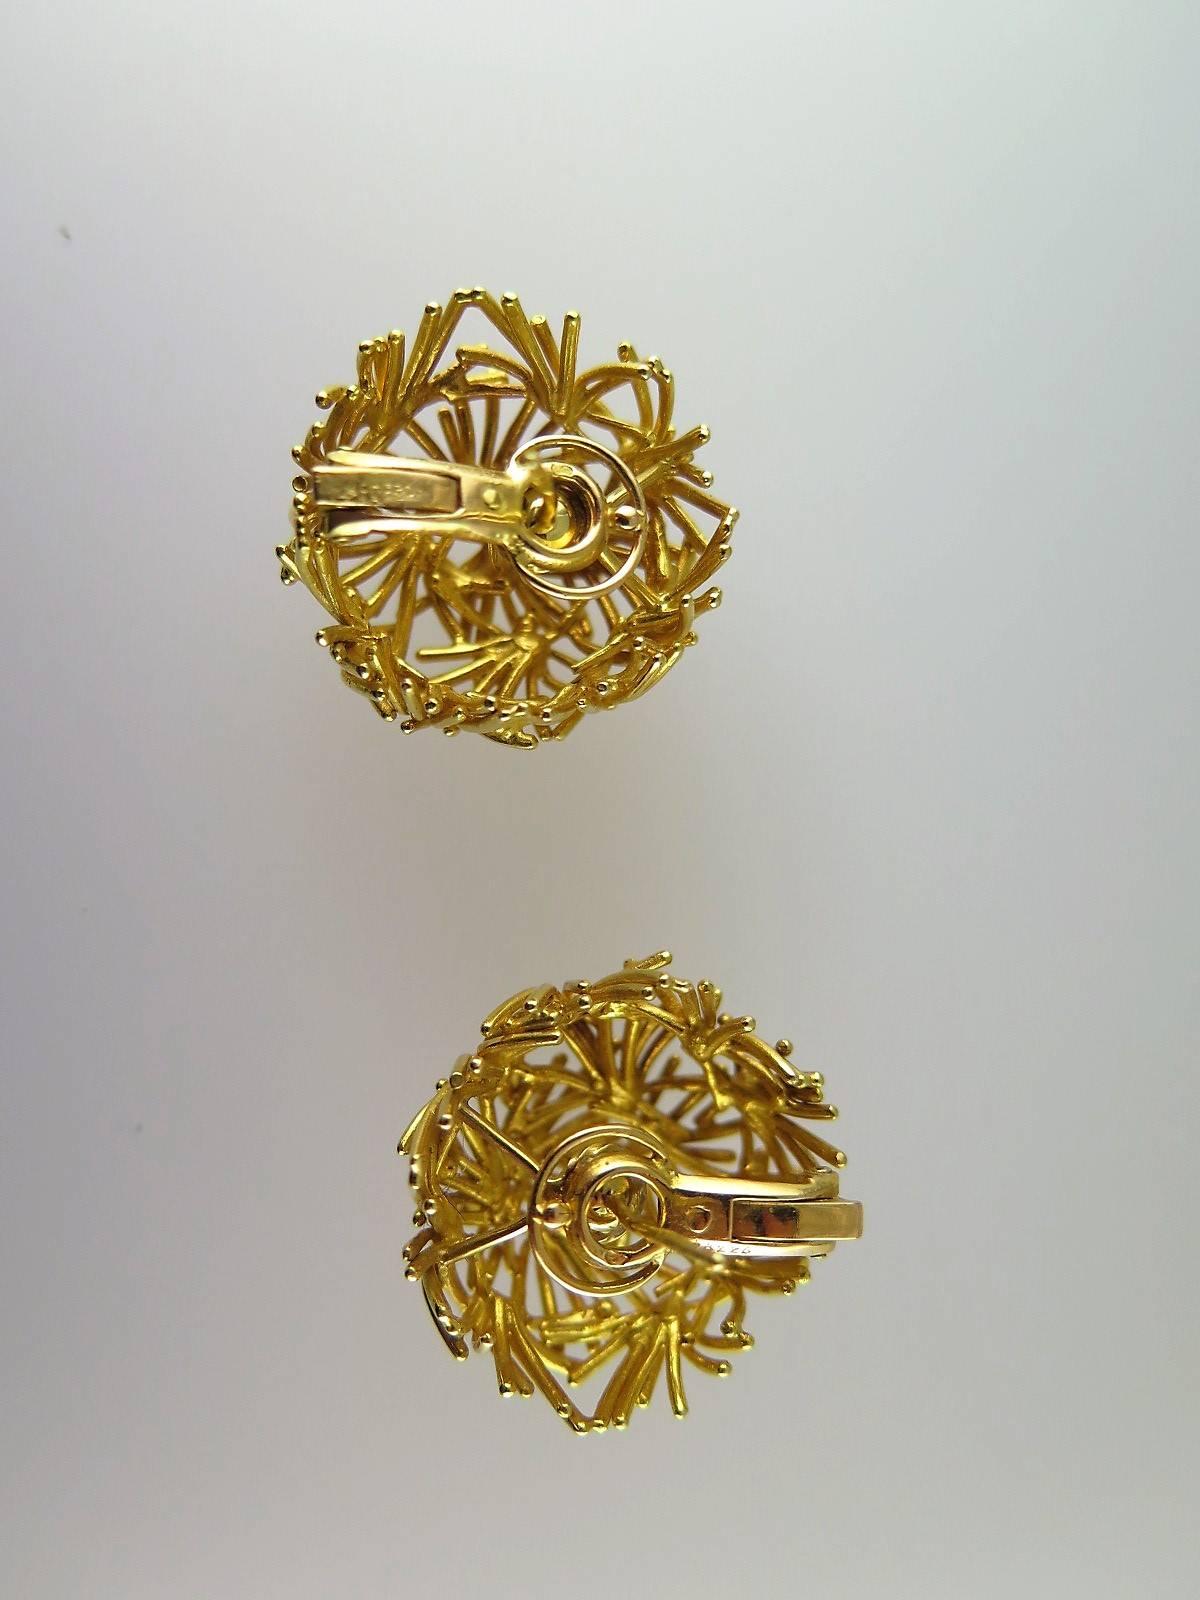 Pair of Gold Bird's Nest Earrings by Boucheron In Excellent Condition For Sale In London, GB